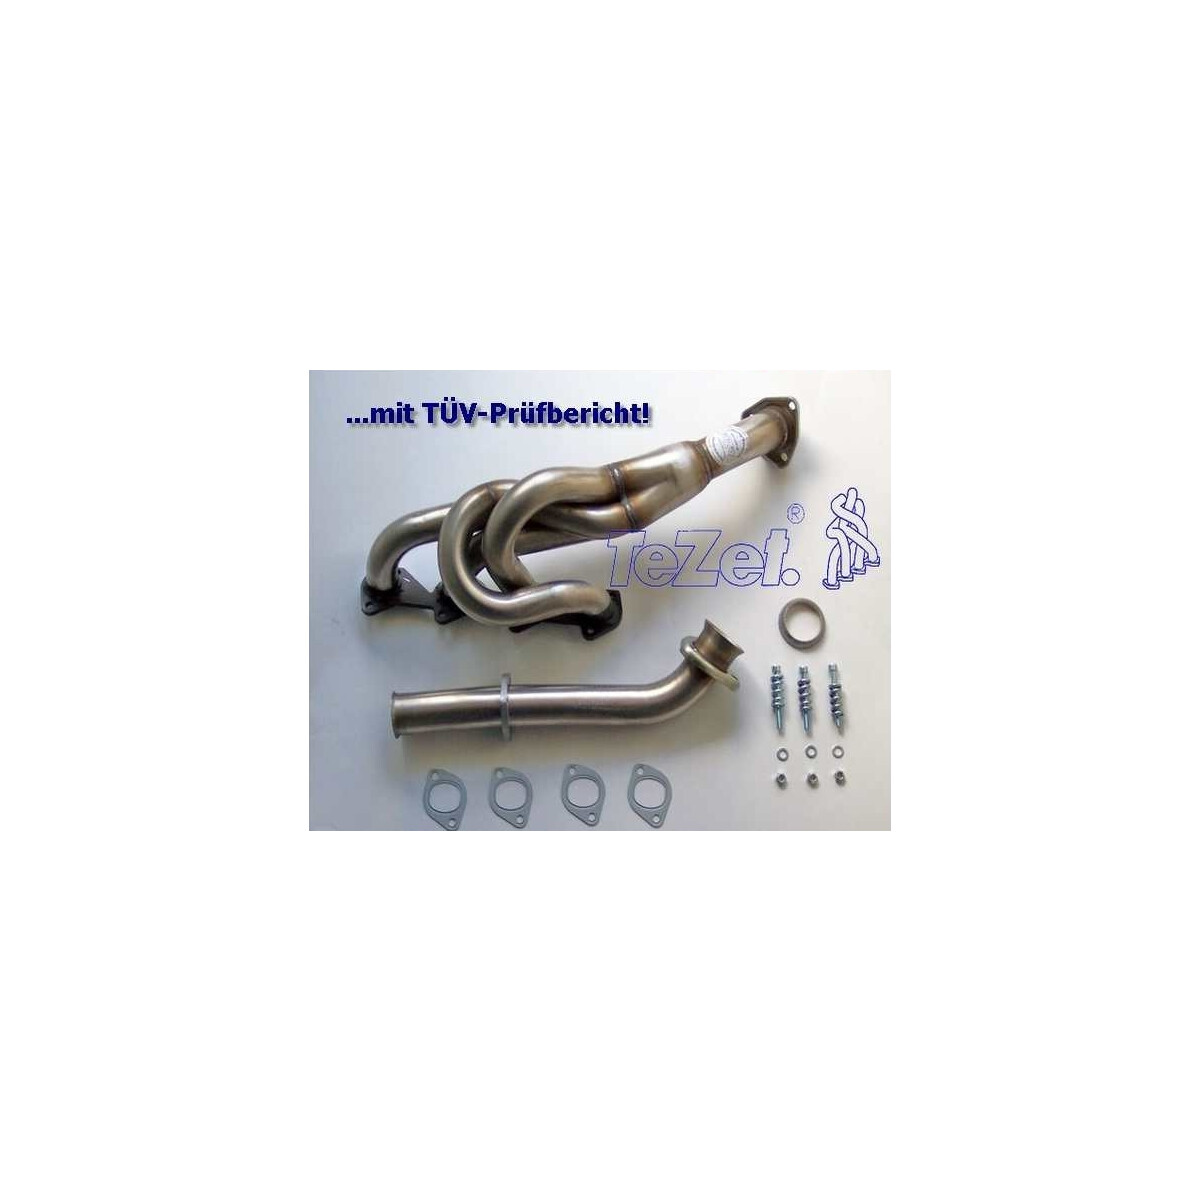 TeZet stainless steel exhaust header for 2002 (Custom made product! More infos see the product description)